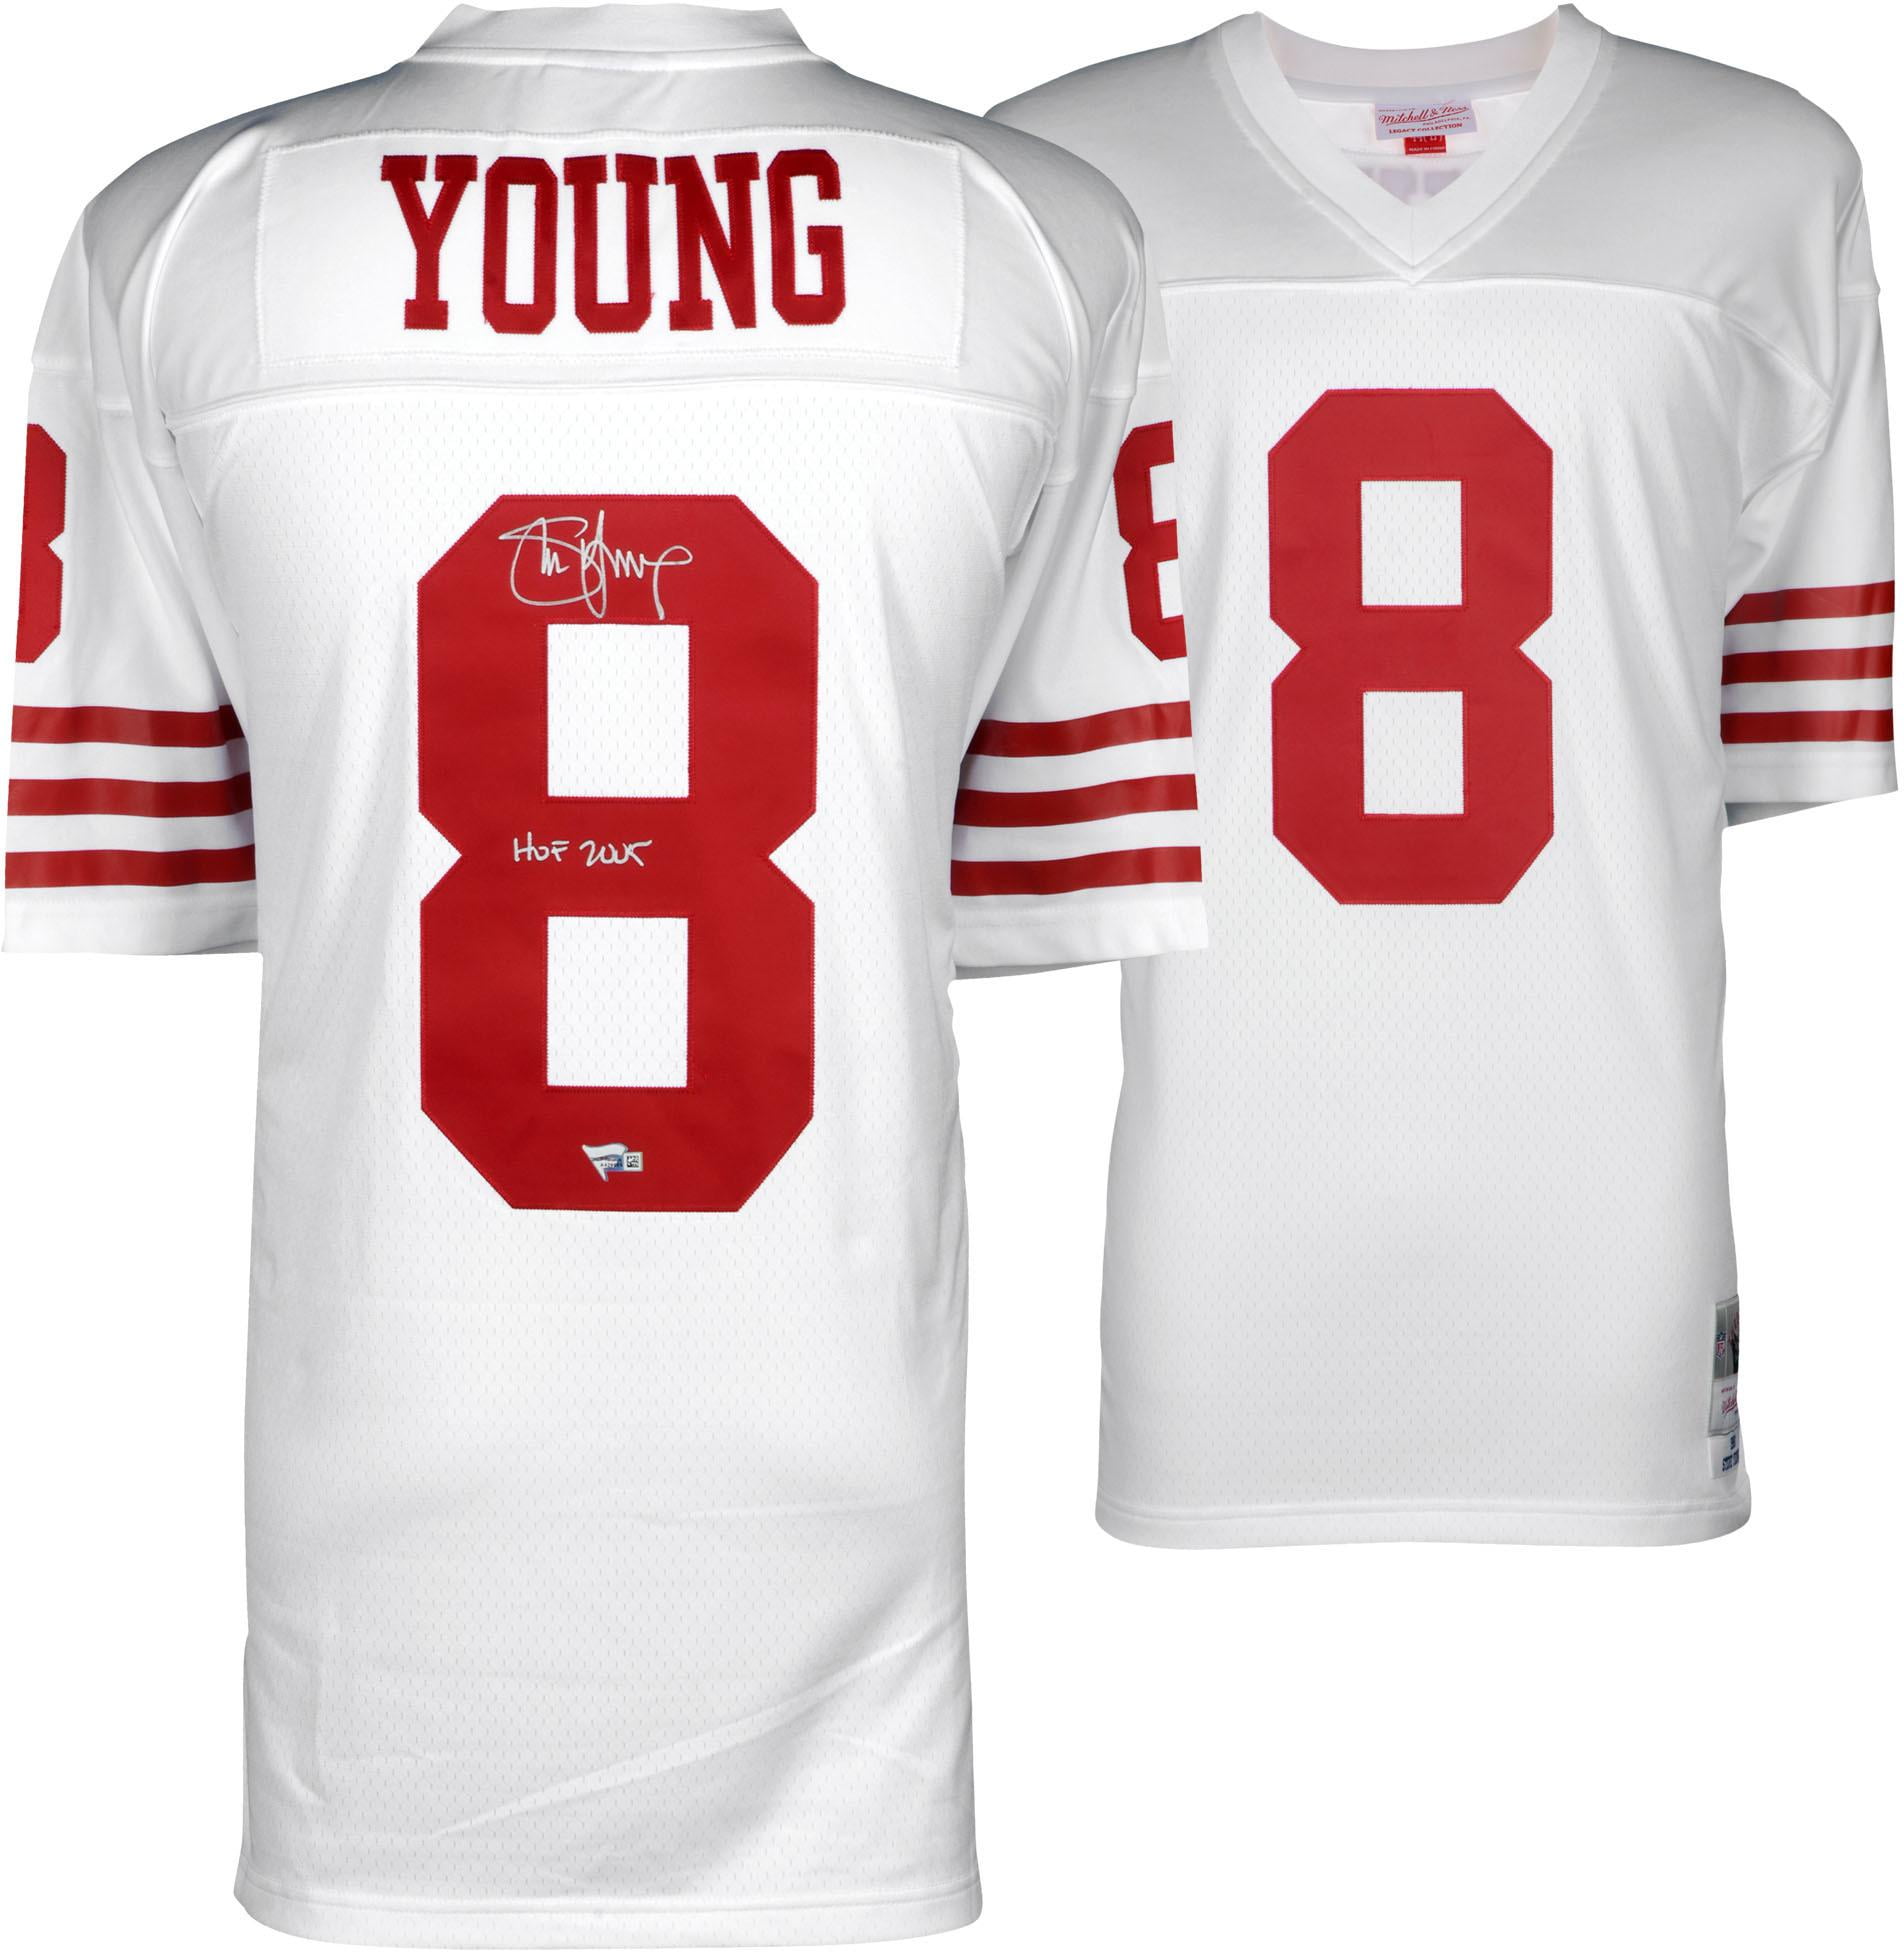 steve young signed jersey